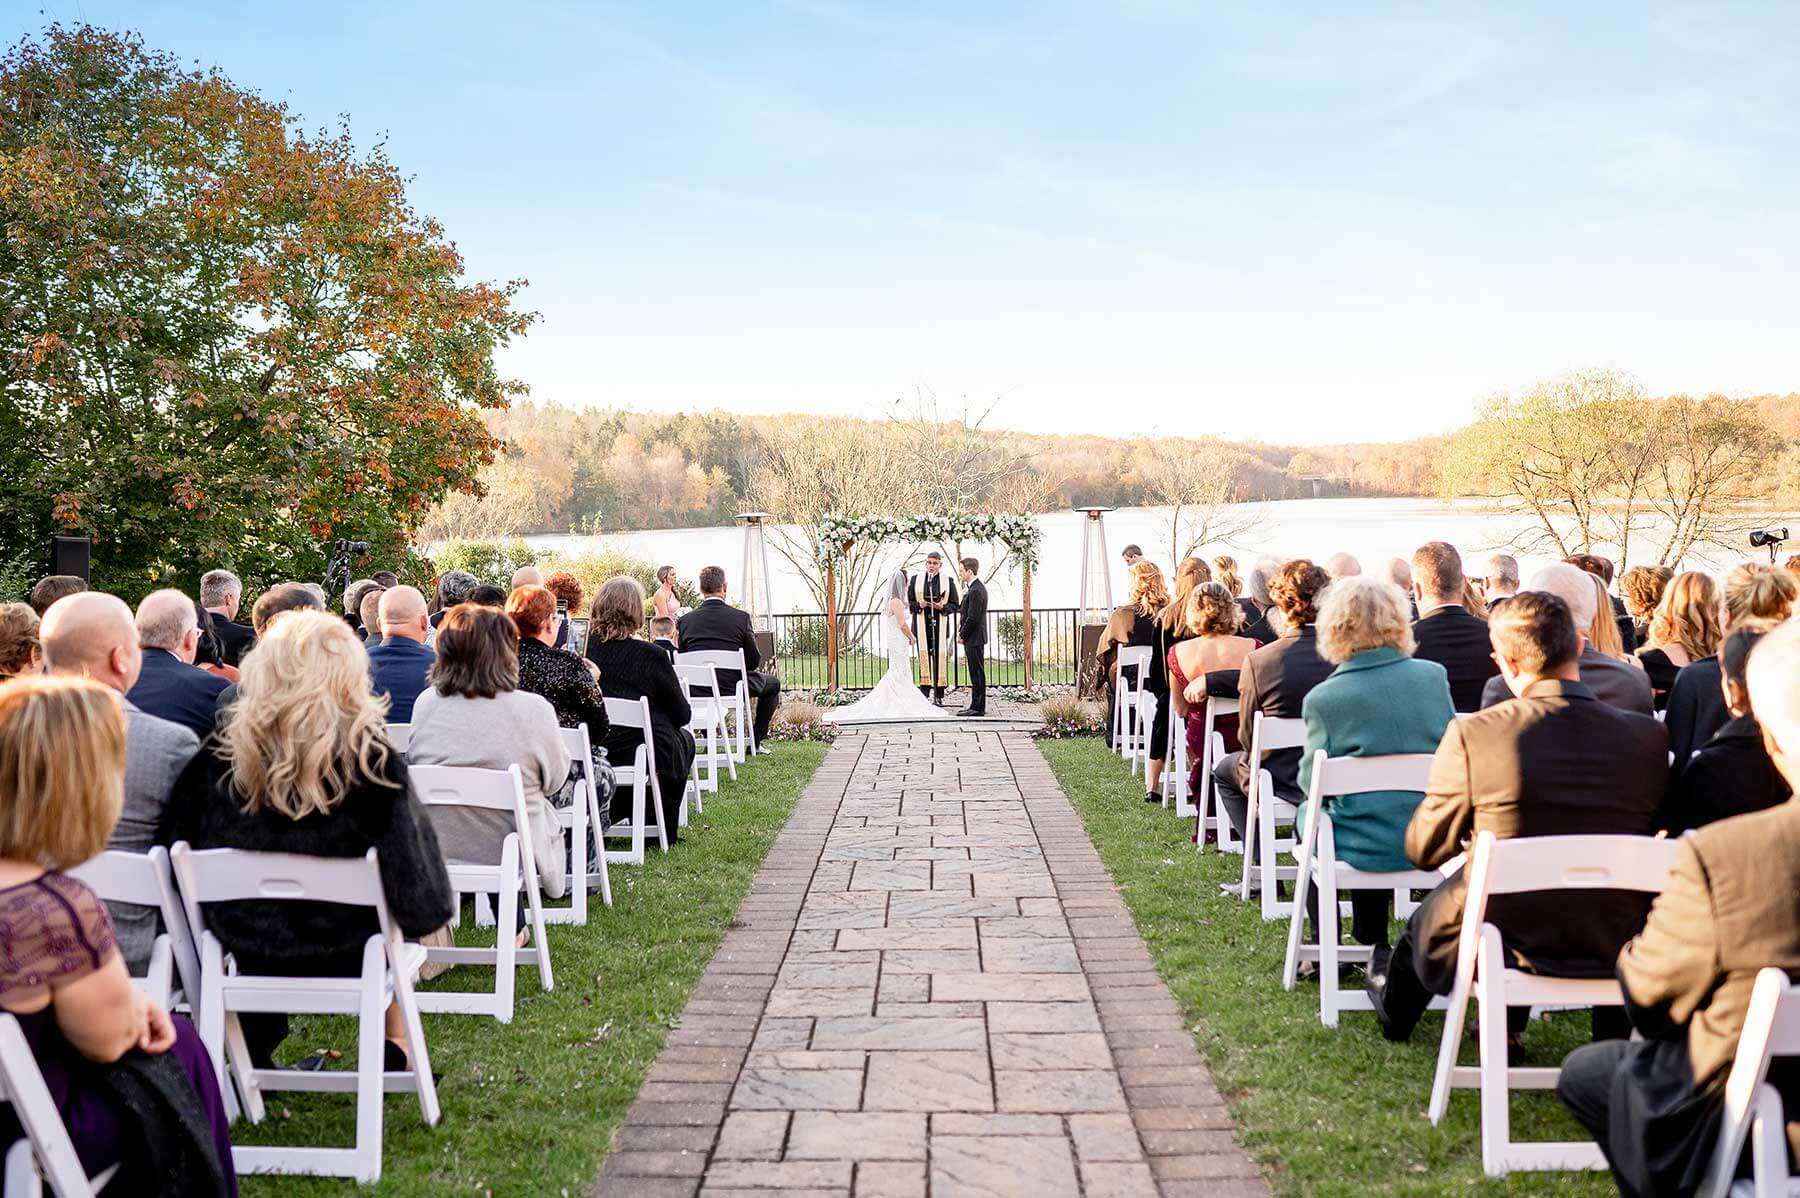 A wedding ceremony at a lake with chairs in the background.